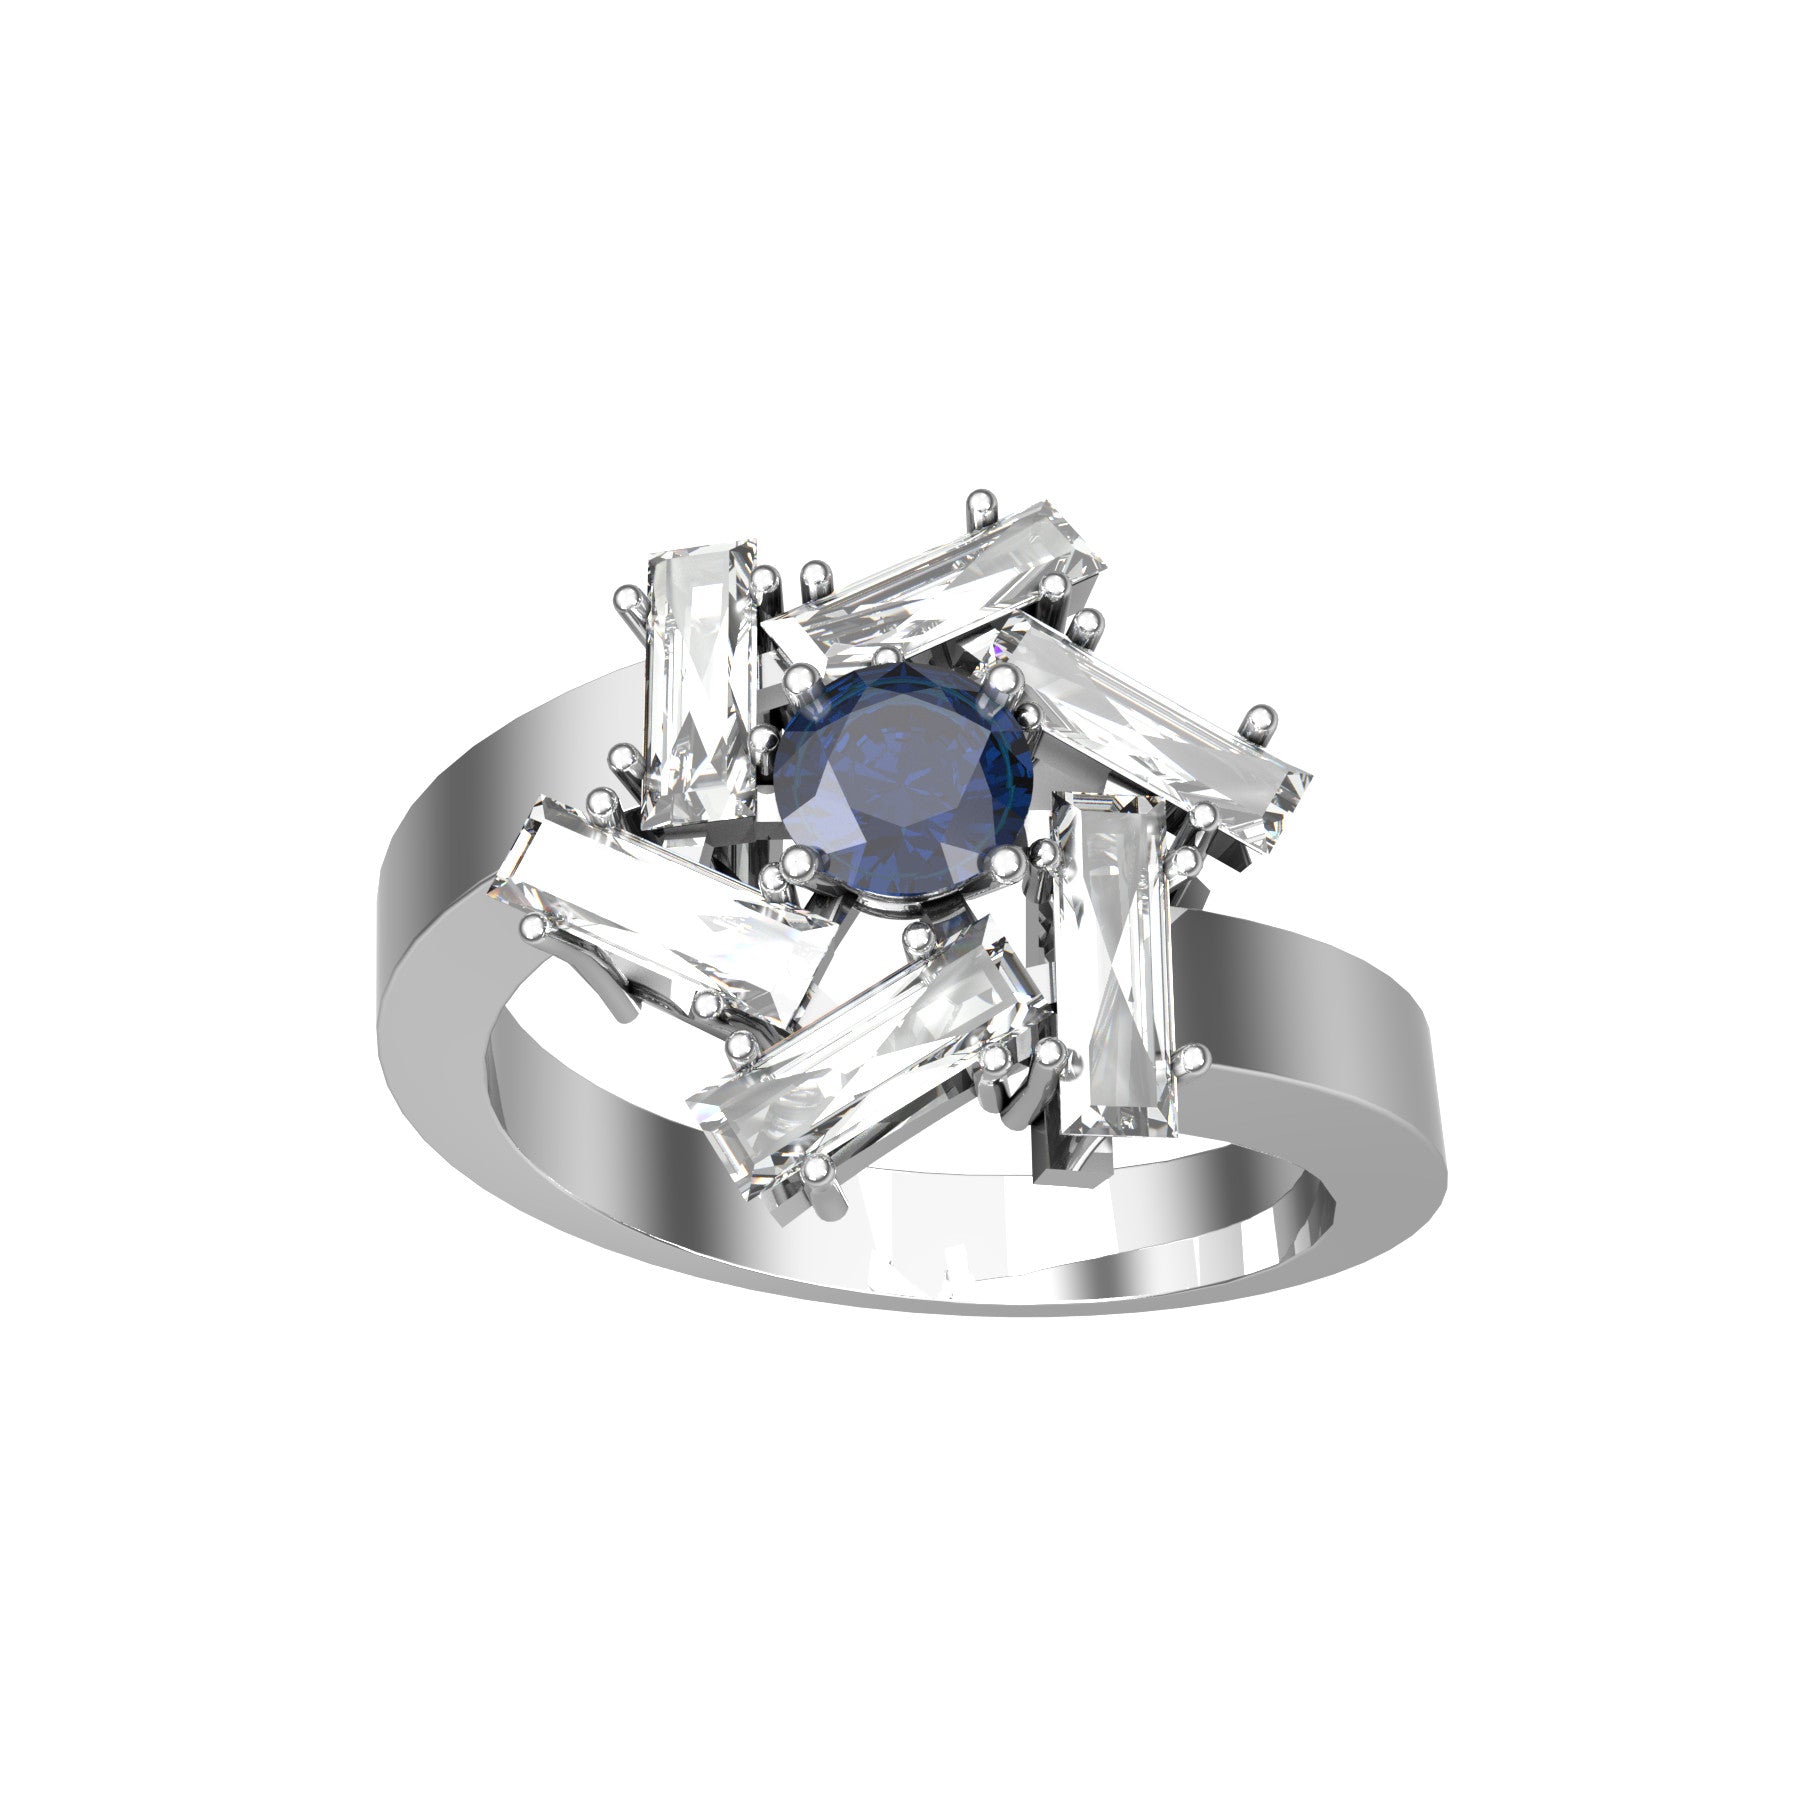 moulinet ring, 18 K white gold, about 0,34 ct round natural sapphire, natural baguette diamonds, weight about 5,5 g. (0.19 oz), width 13,3 mm max